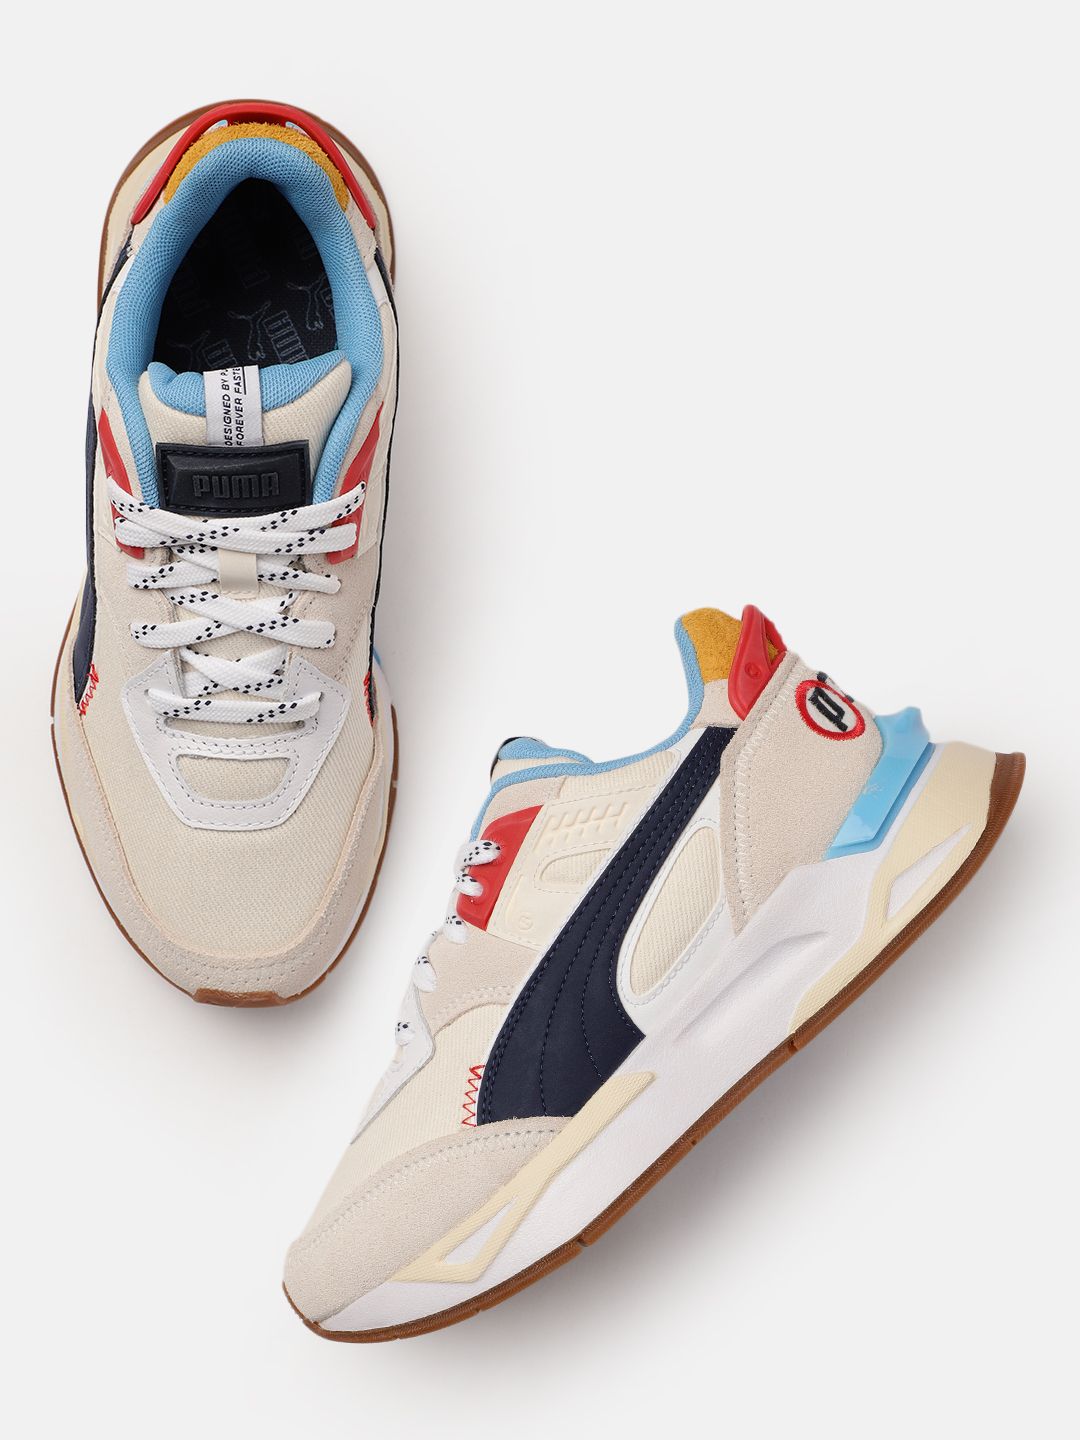 Puma Unisex Off White Mirage Sport Patches Sneakers Price in India